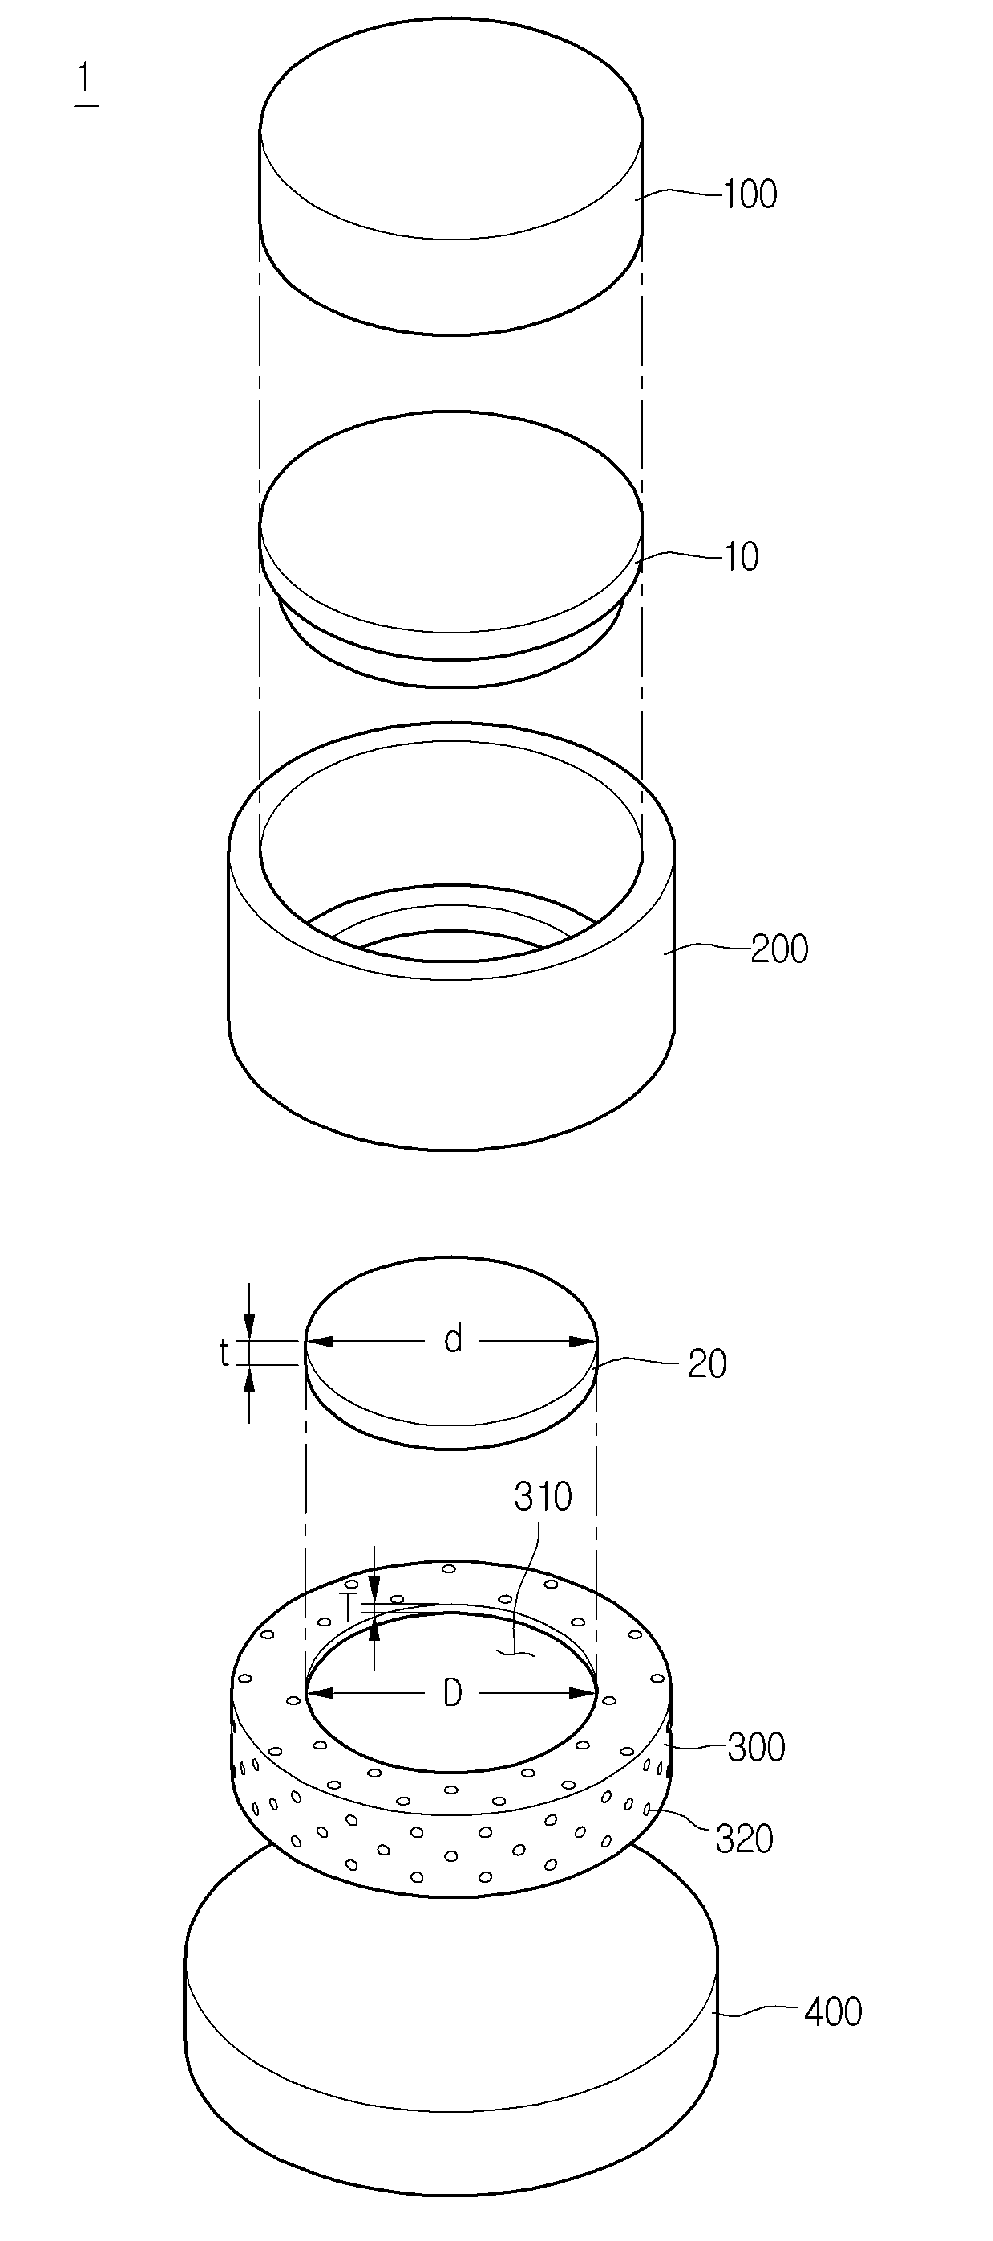 Apparatus for attaching seed